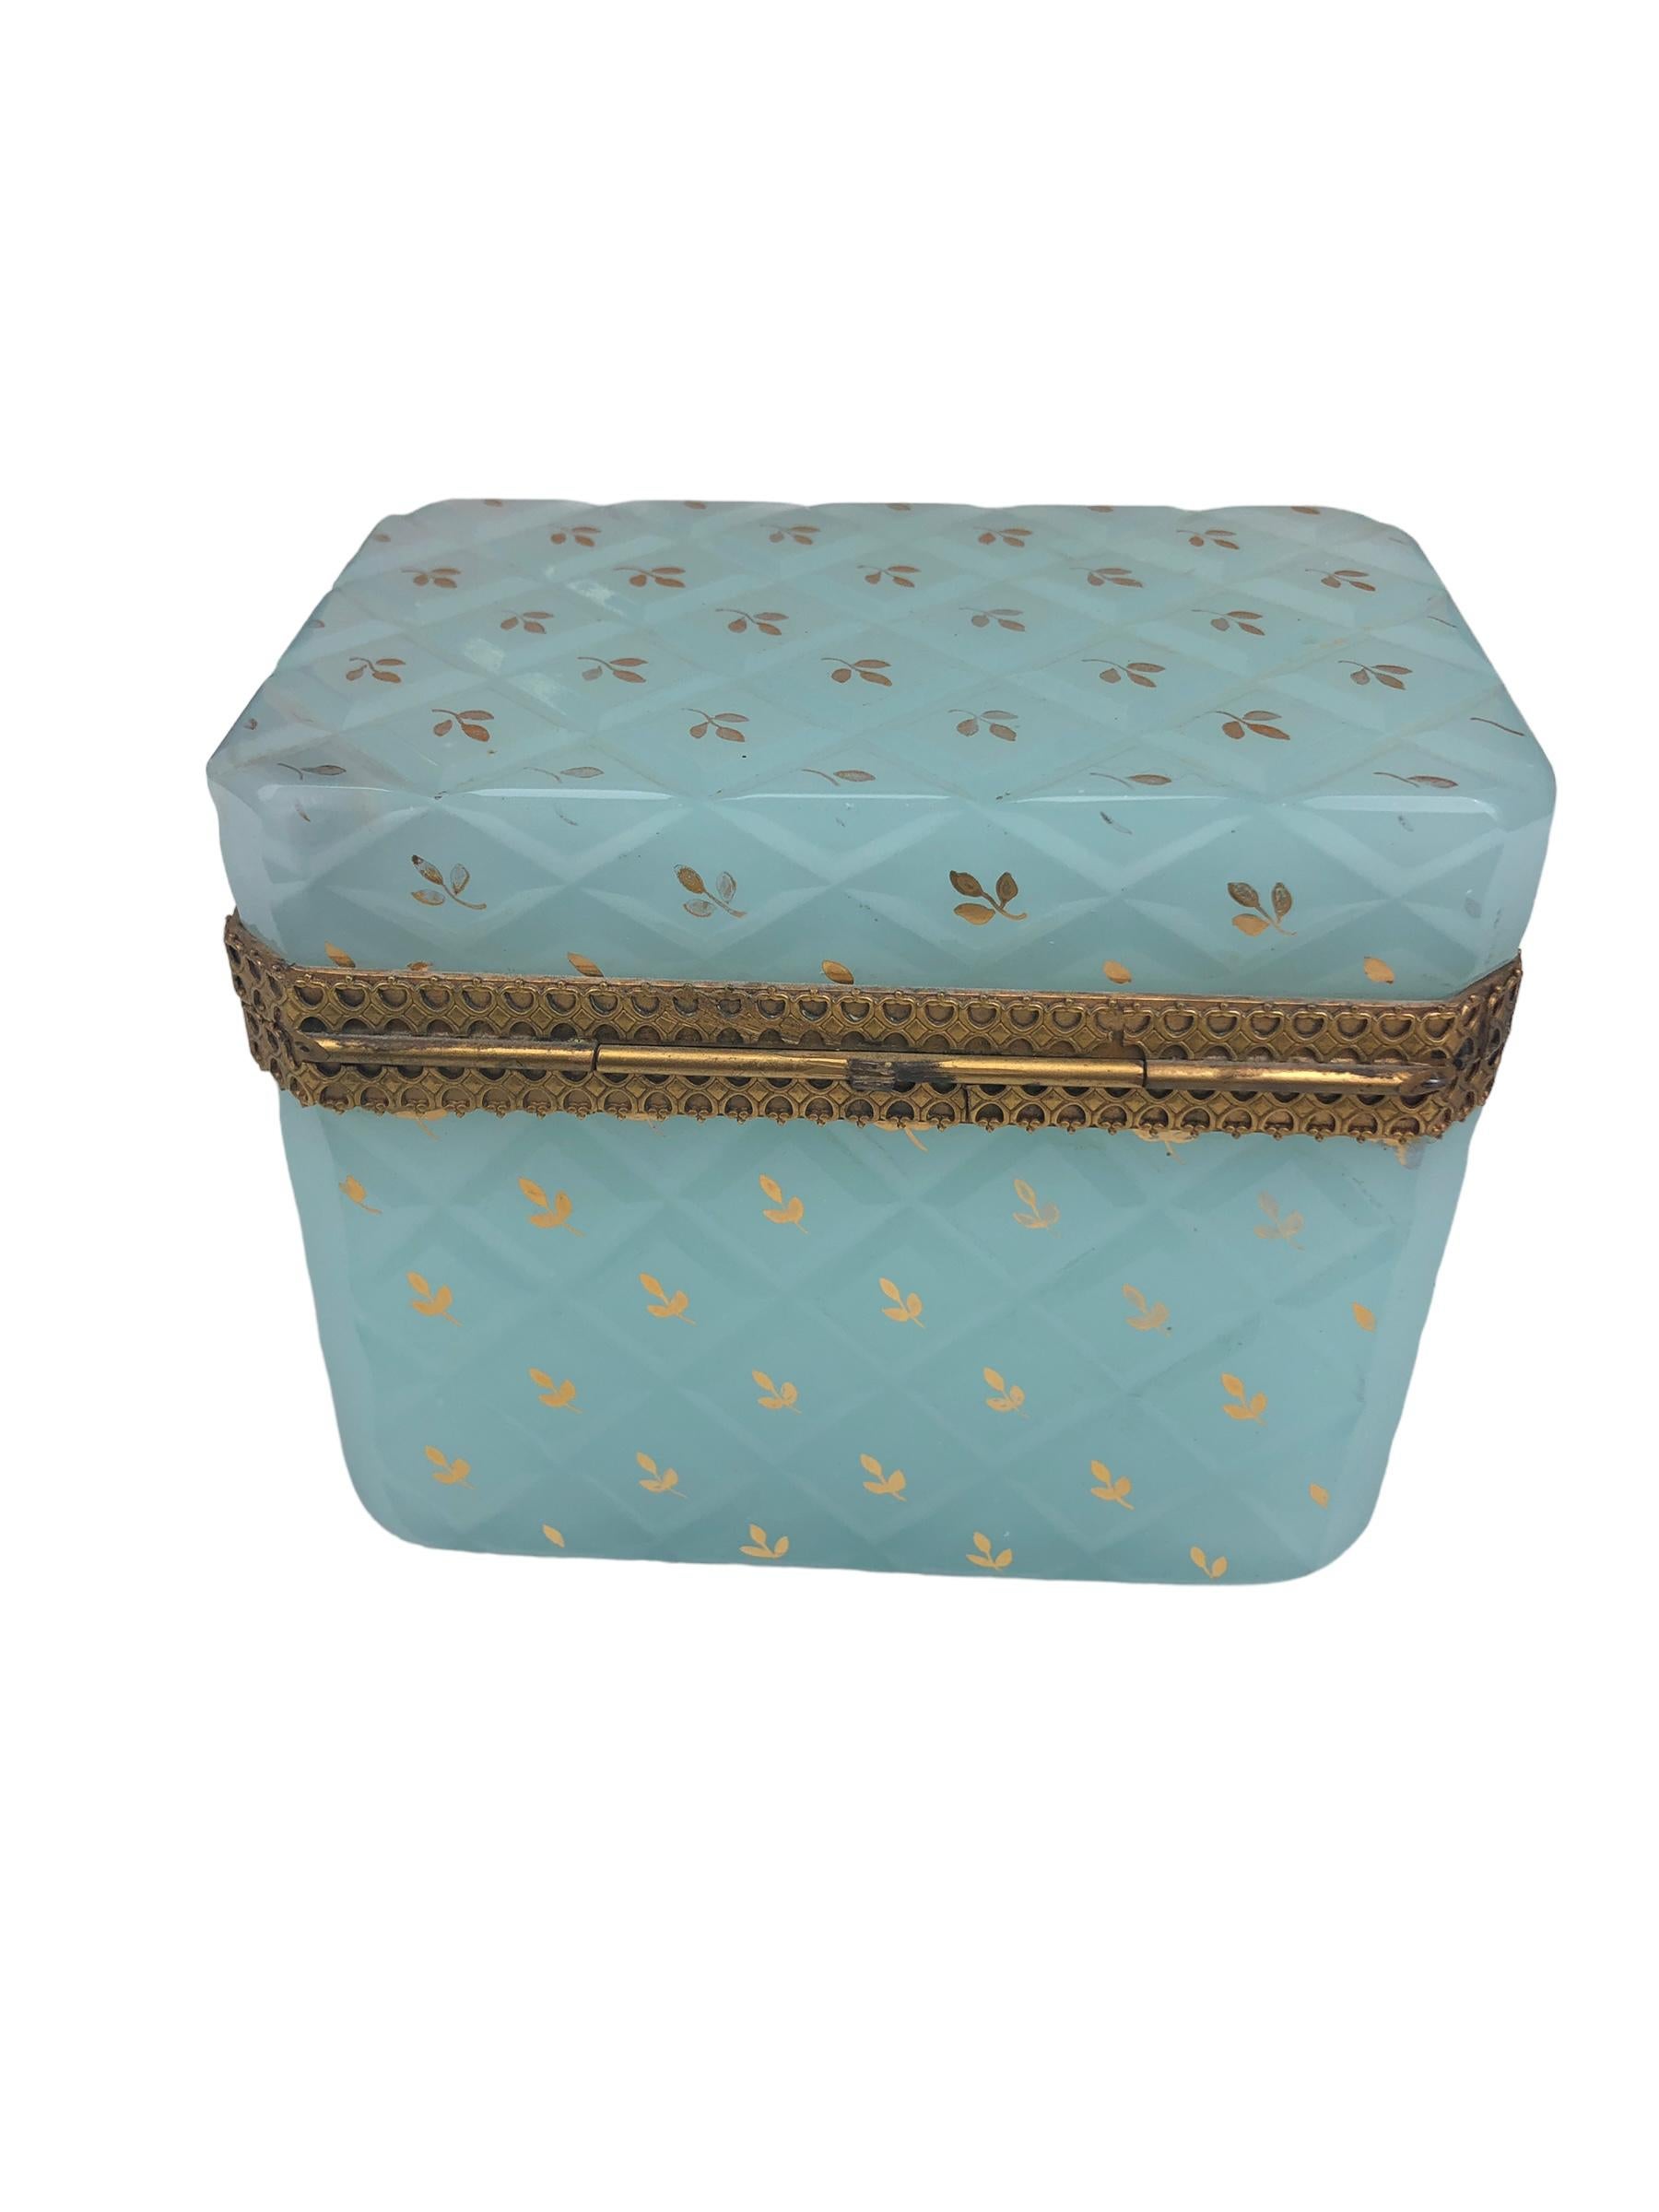 20th Century French Art Deco Blue Opaline Box For Sale